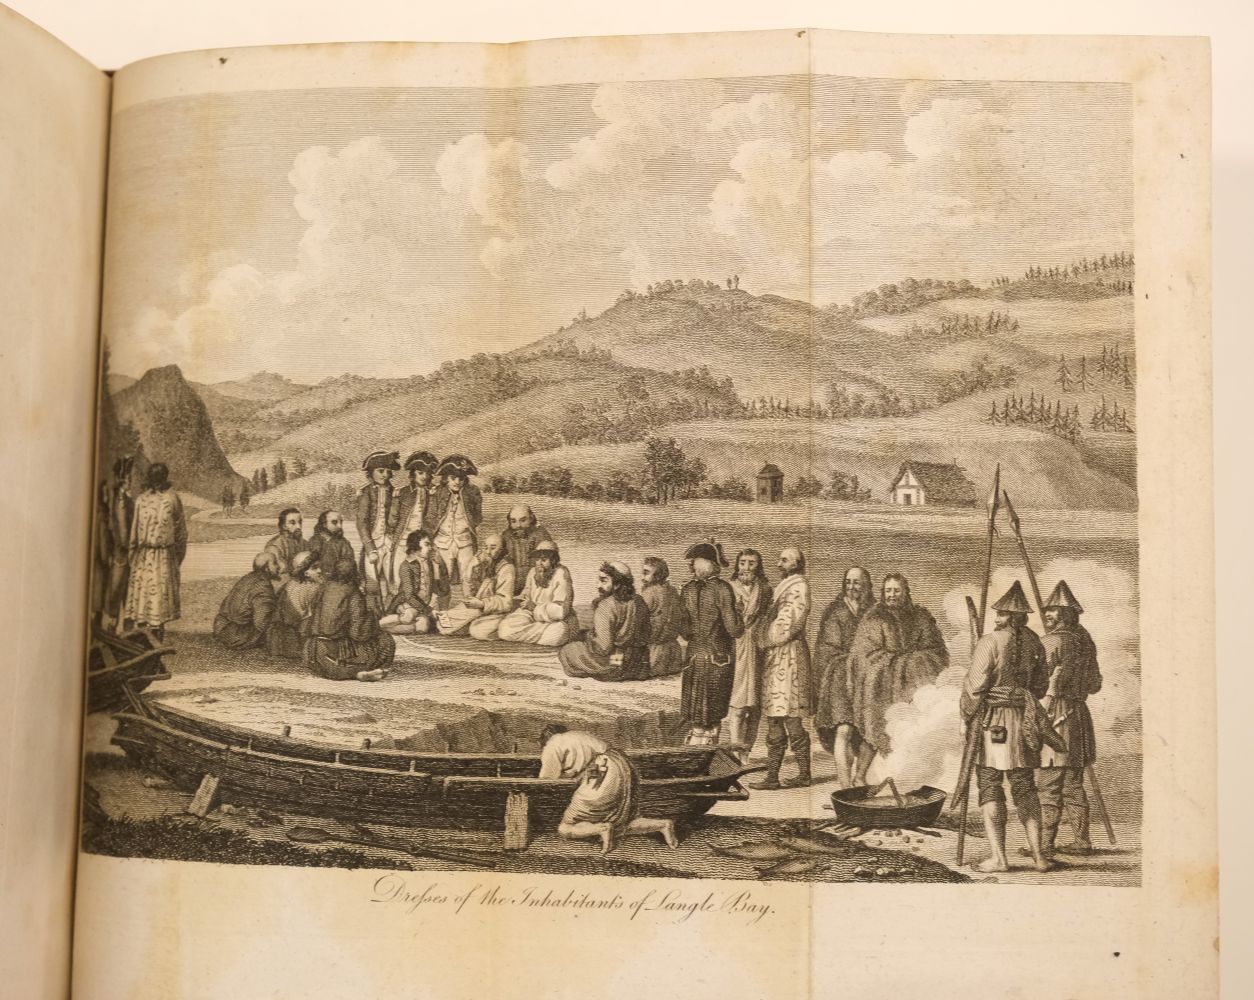 La Perouse (Jean-Francois). The Voyage of La Perouse Round the World, 3 volumes, 1798 - Image 18 of 18